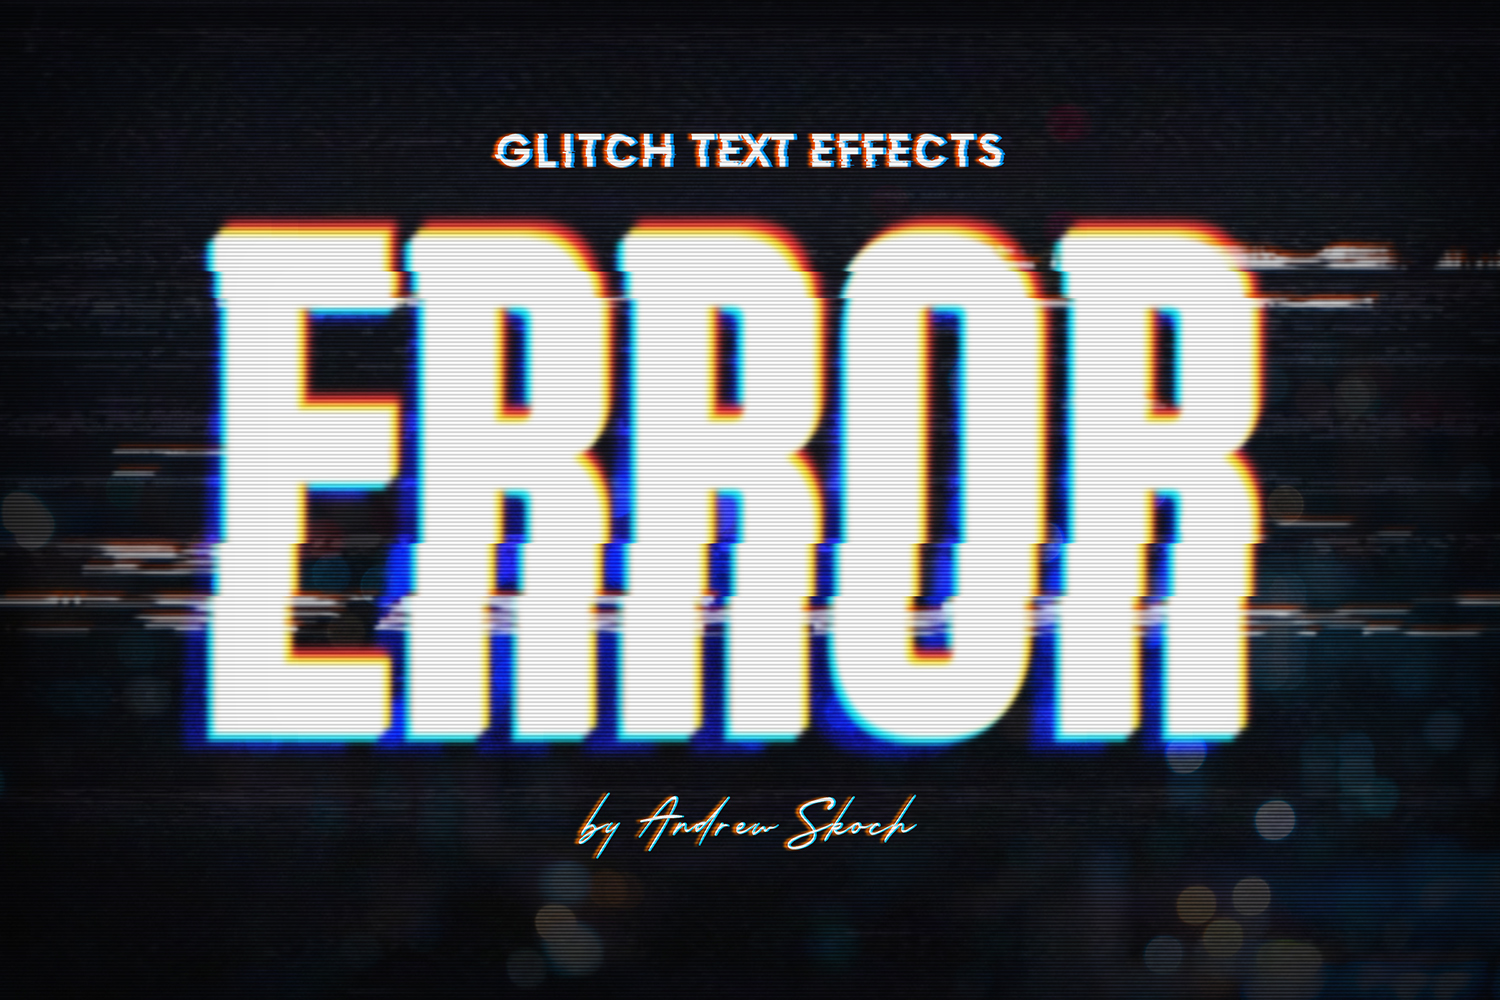 Glitch Text Effects, Add-ons | GraphicRiver